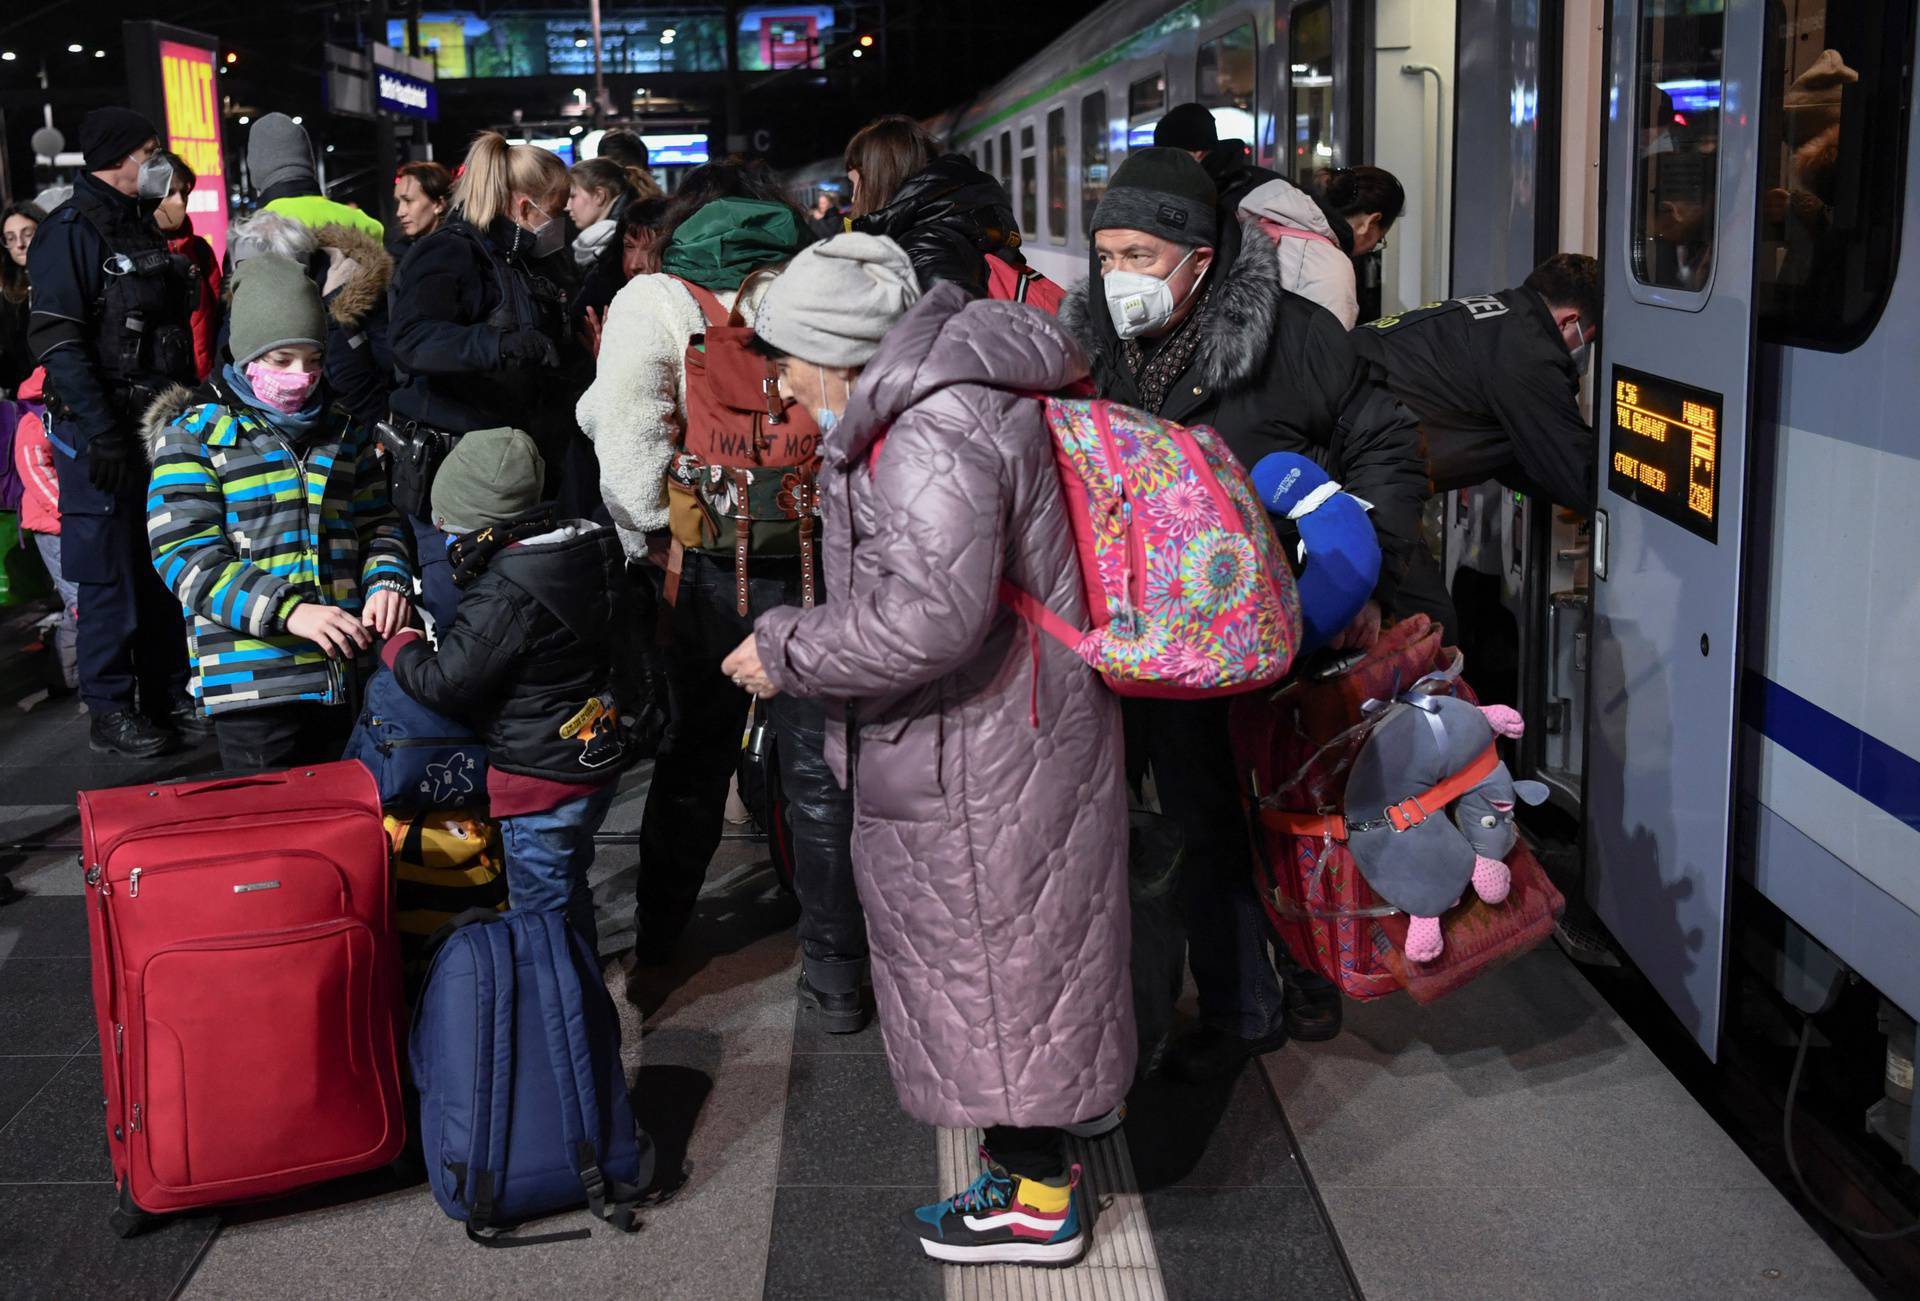 Refugees arrive in a train from Poland at Berlin's central station